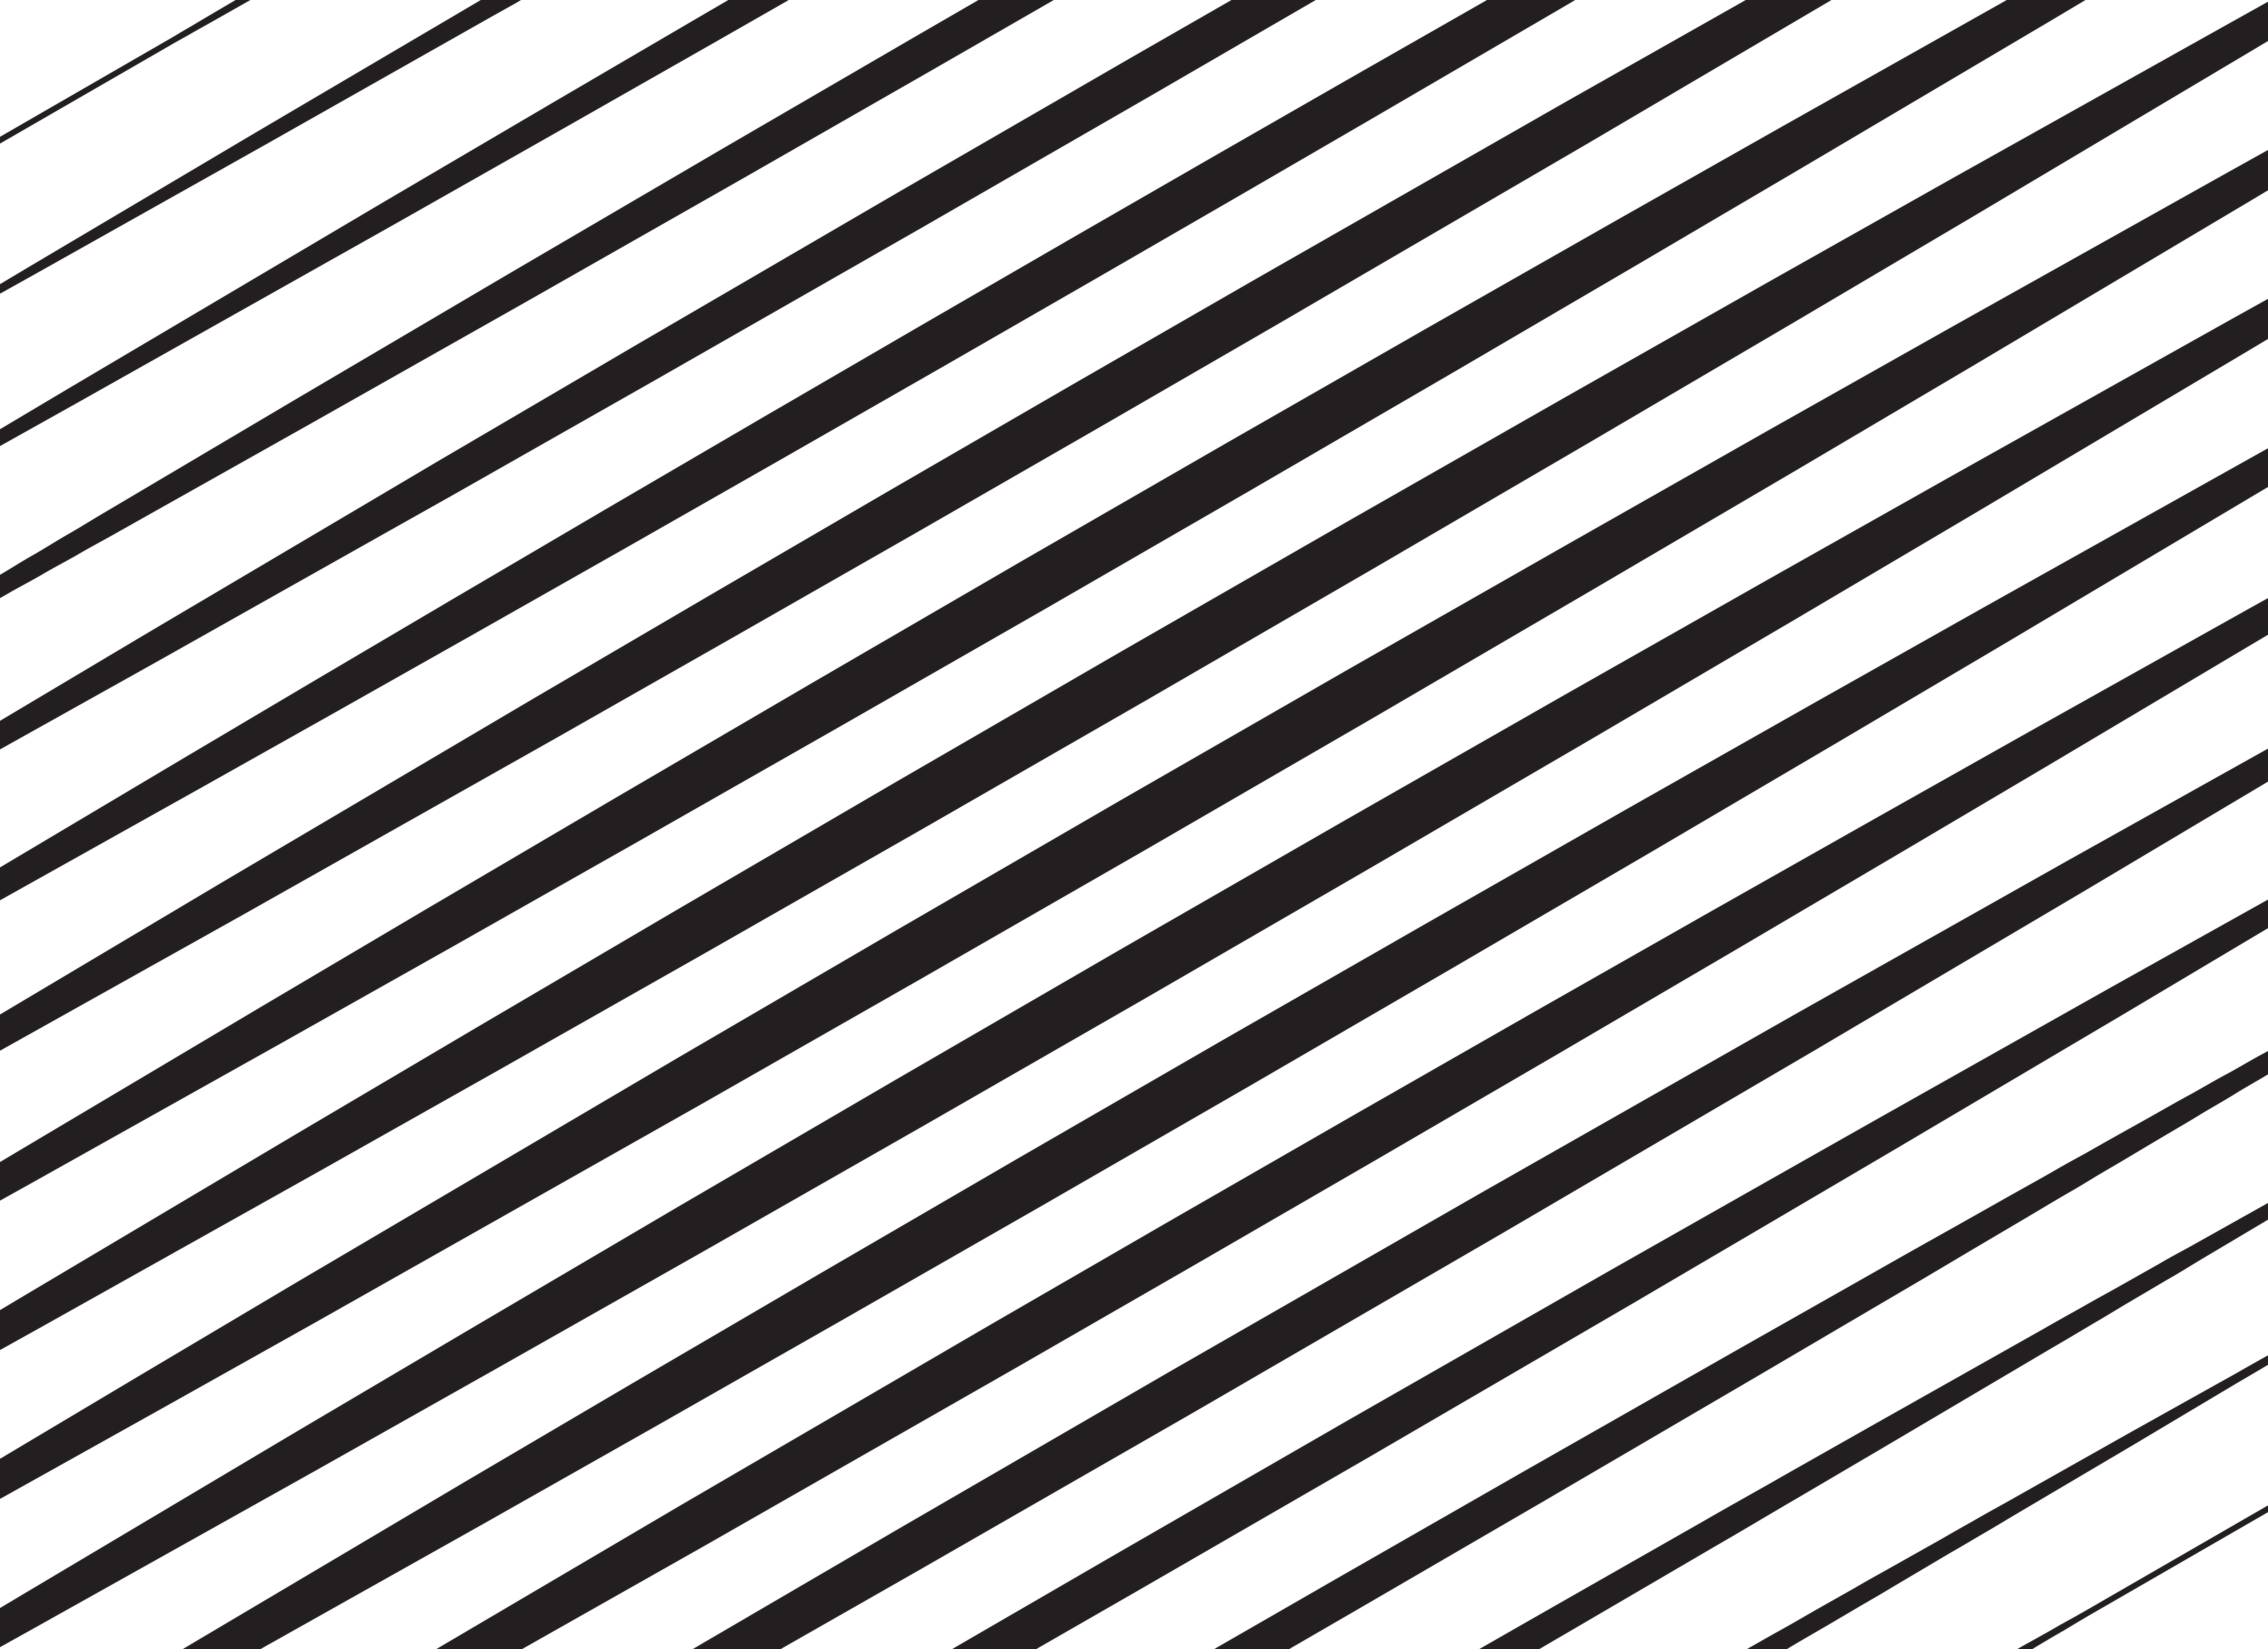 abstract diagonal lines pattern background - Download Free Vector Art